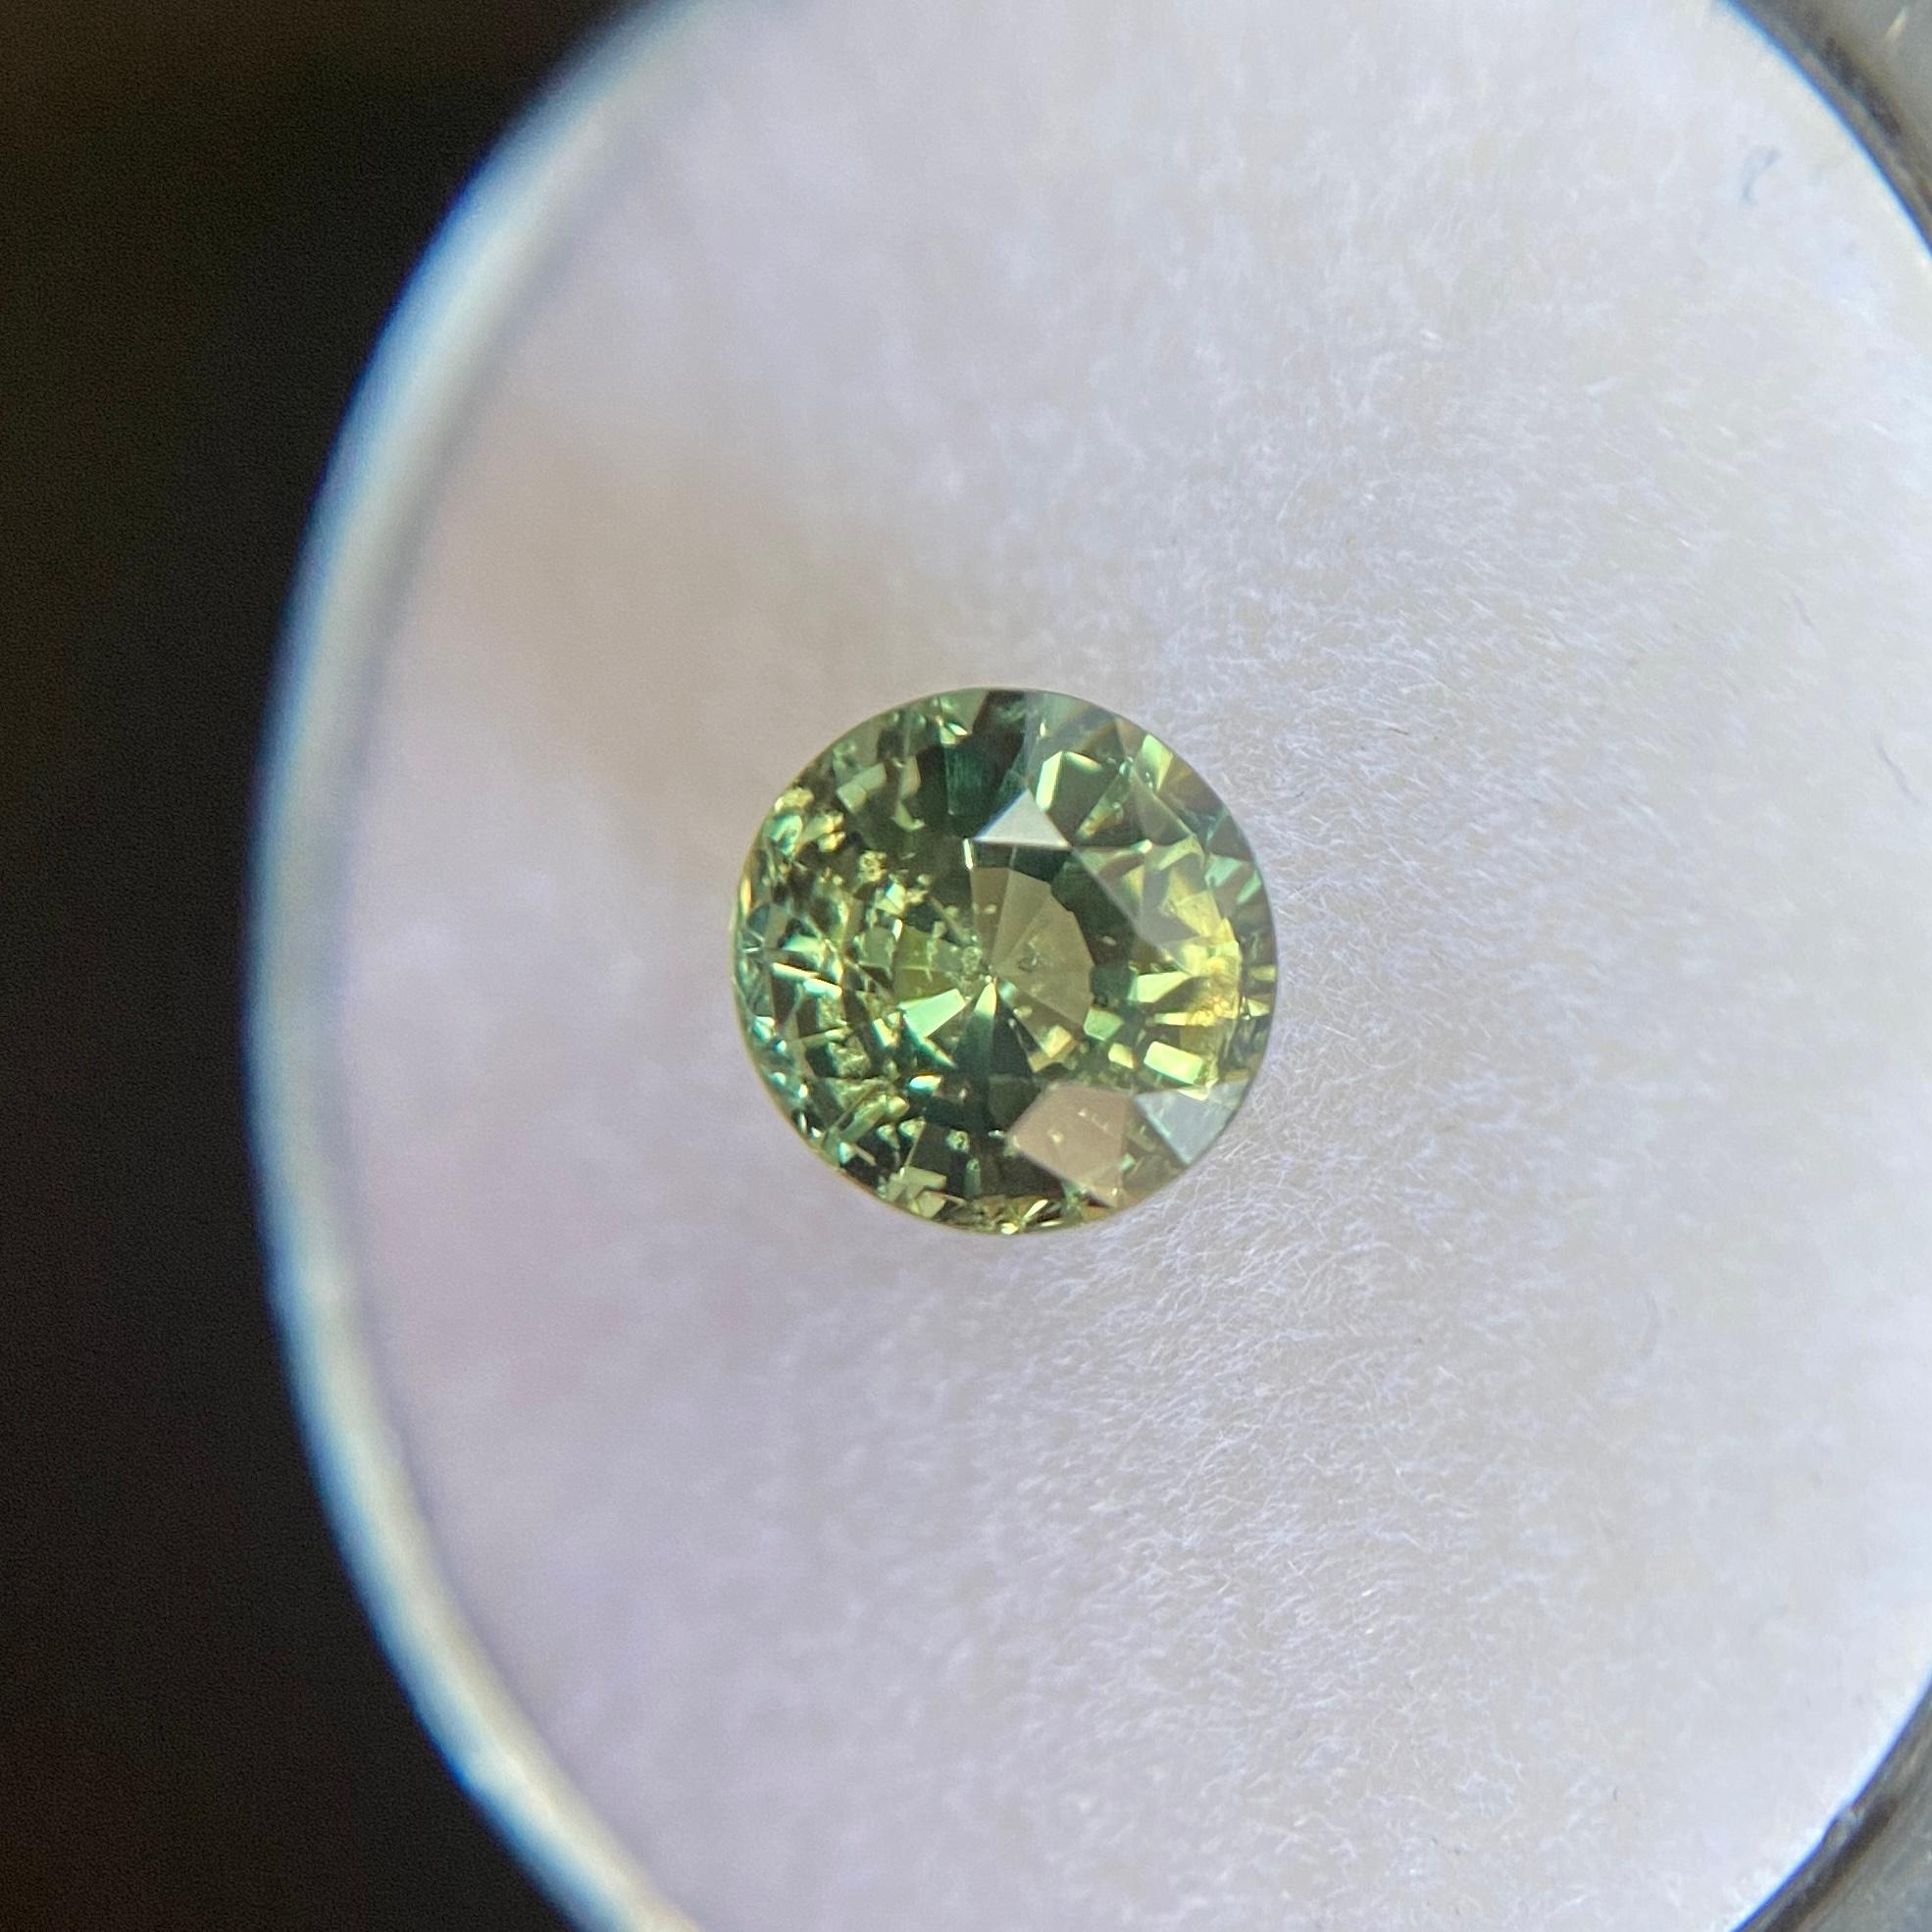 GIA Certified 1.36ct Untreated Vivid Green Yellow Sapphire Round Diamond Cut Gem For Sale 3